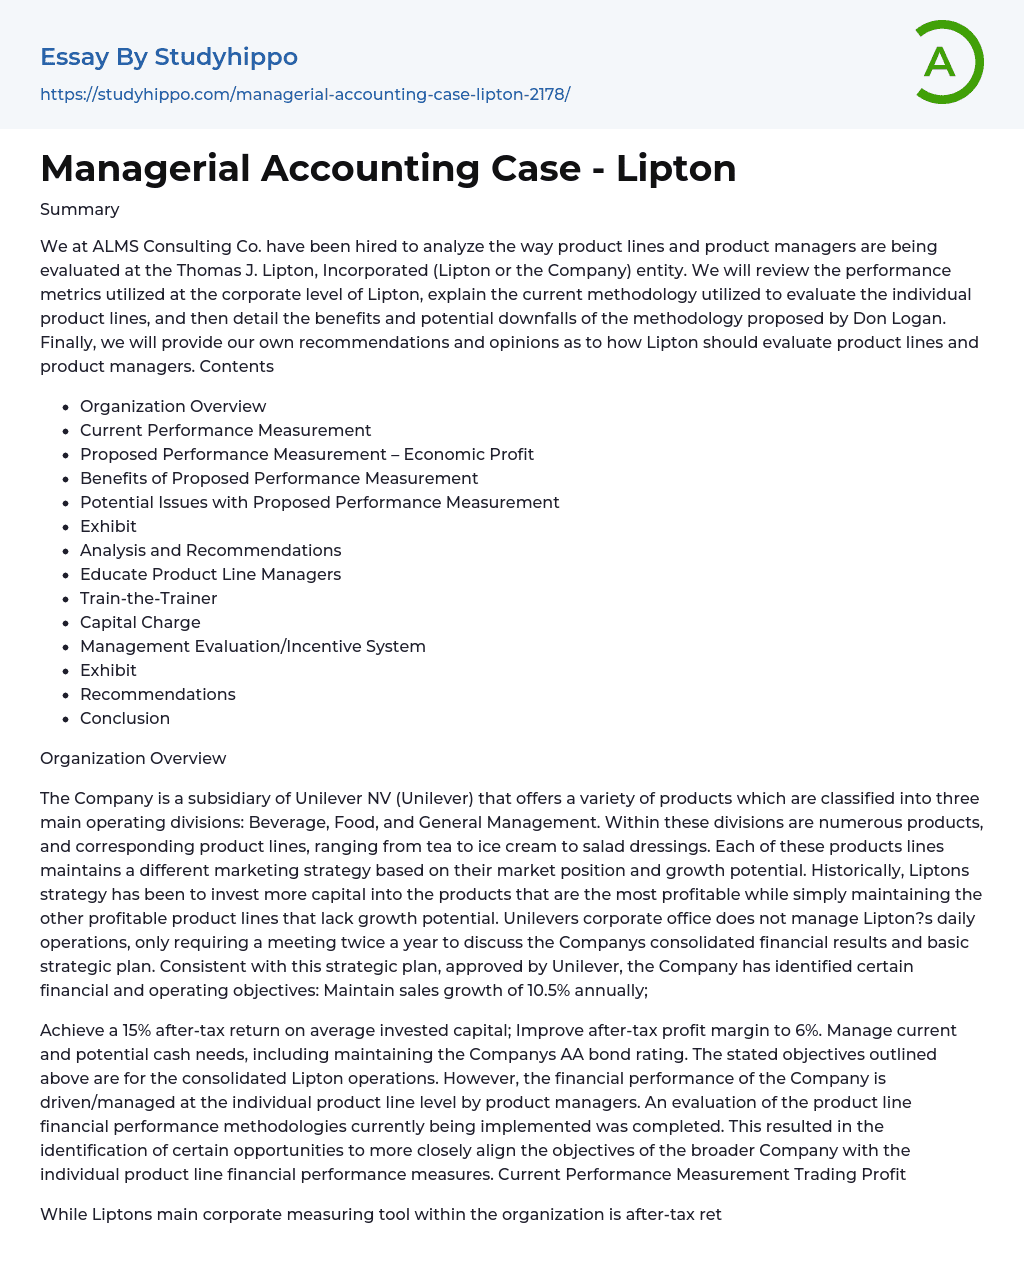 Managerial Accounting Case – Lipton Essay Example